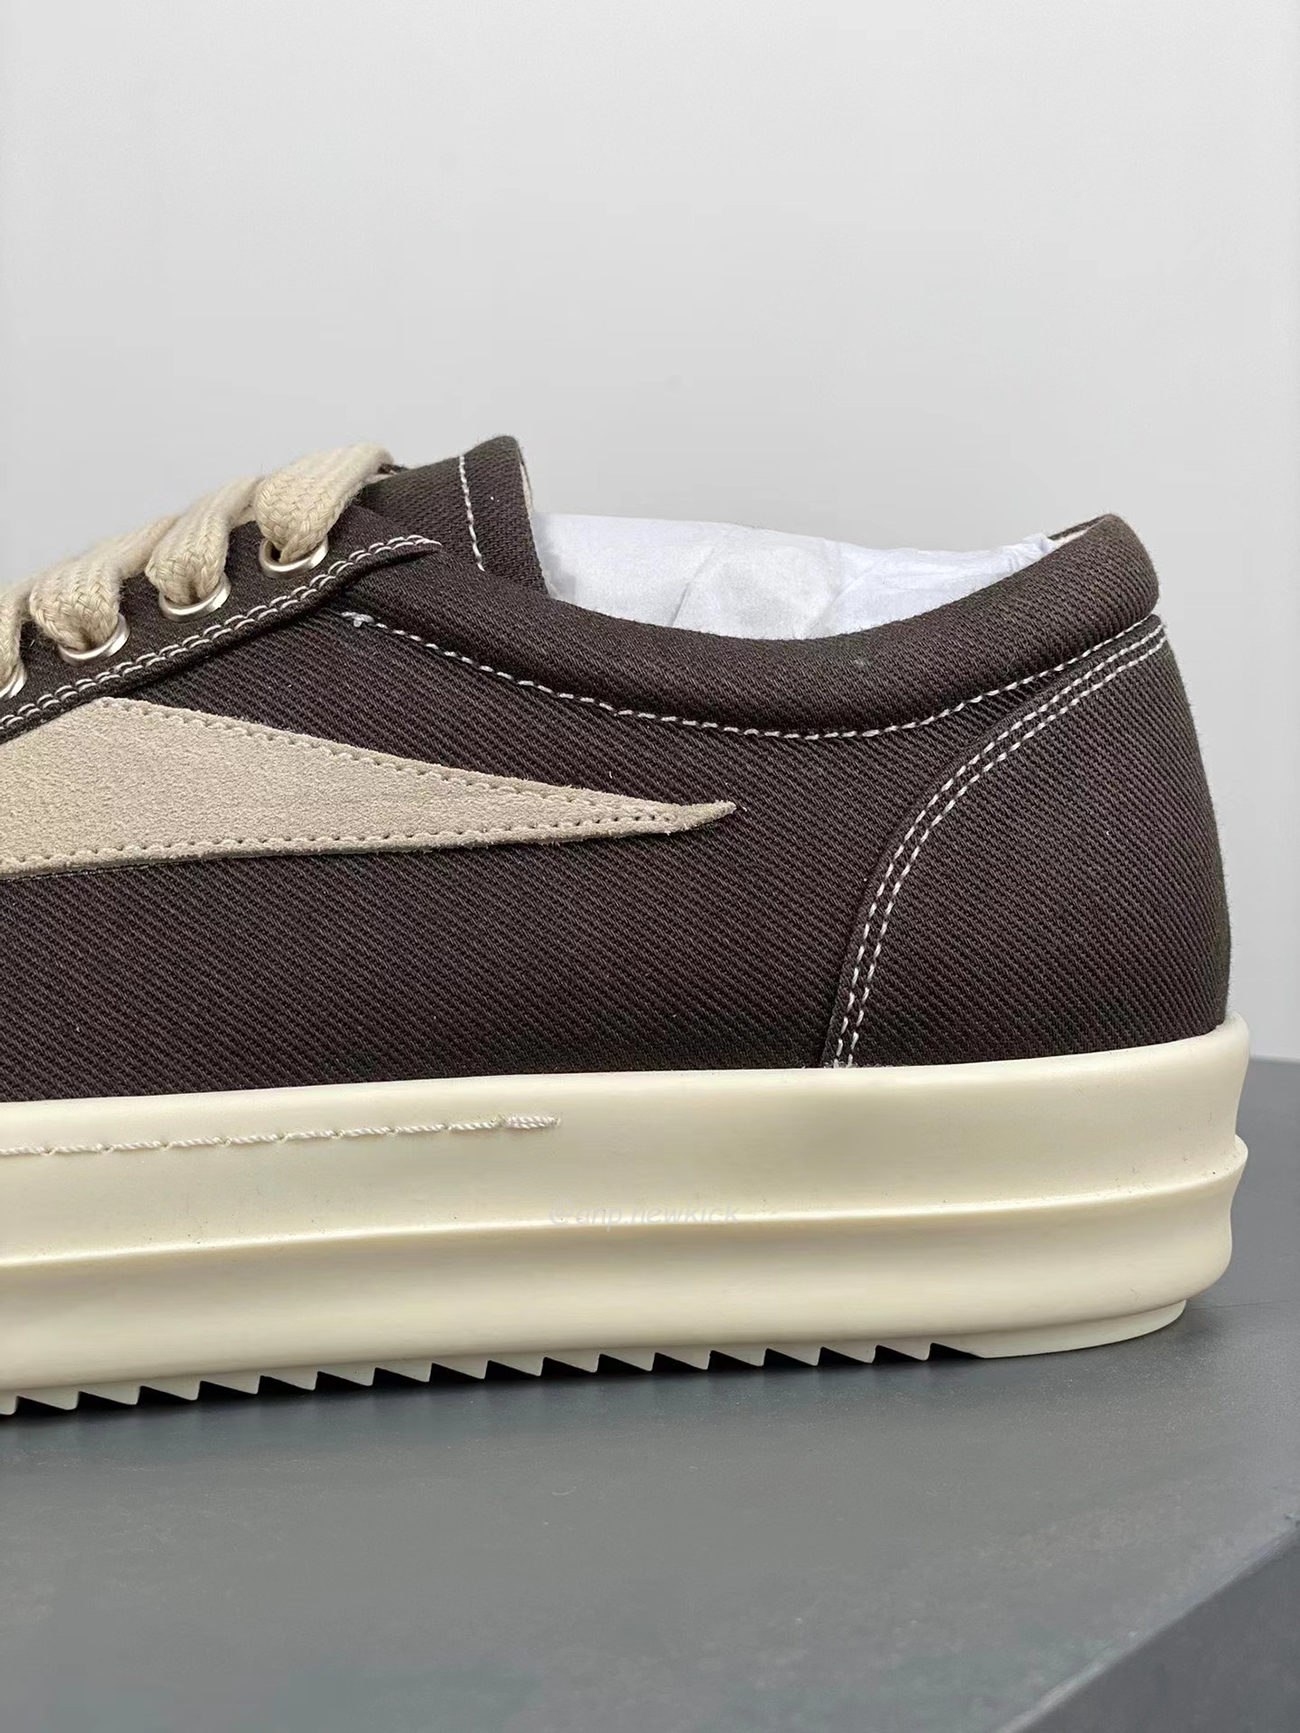 Rick Owens Leather Low Top Vintage Sneakers Suede Canvas Black Taupe Grey Faded Pnk Pearl Milk Dark Dust (19) - newkick.org